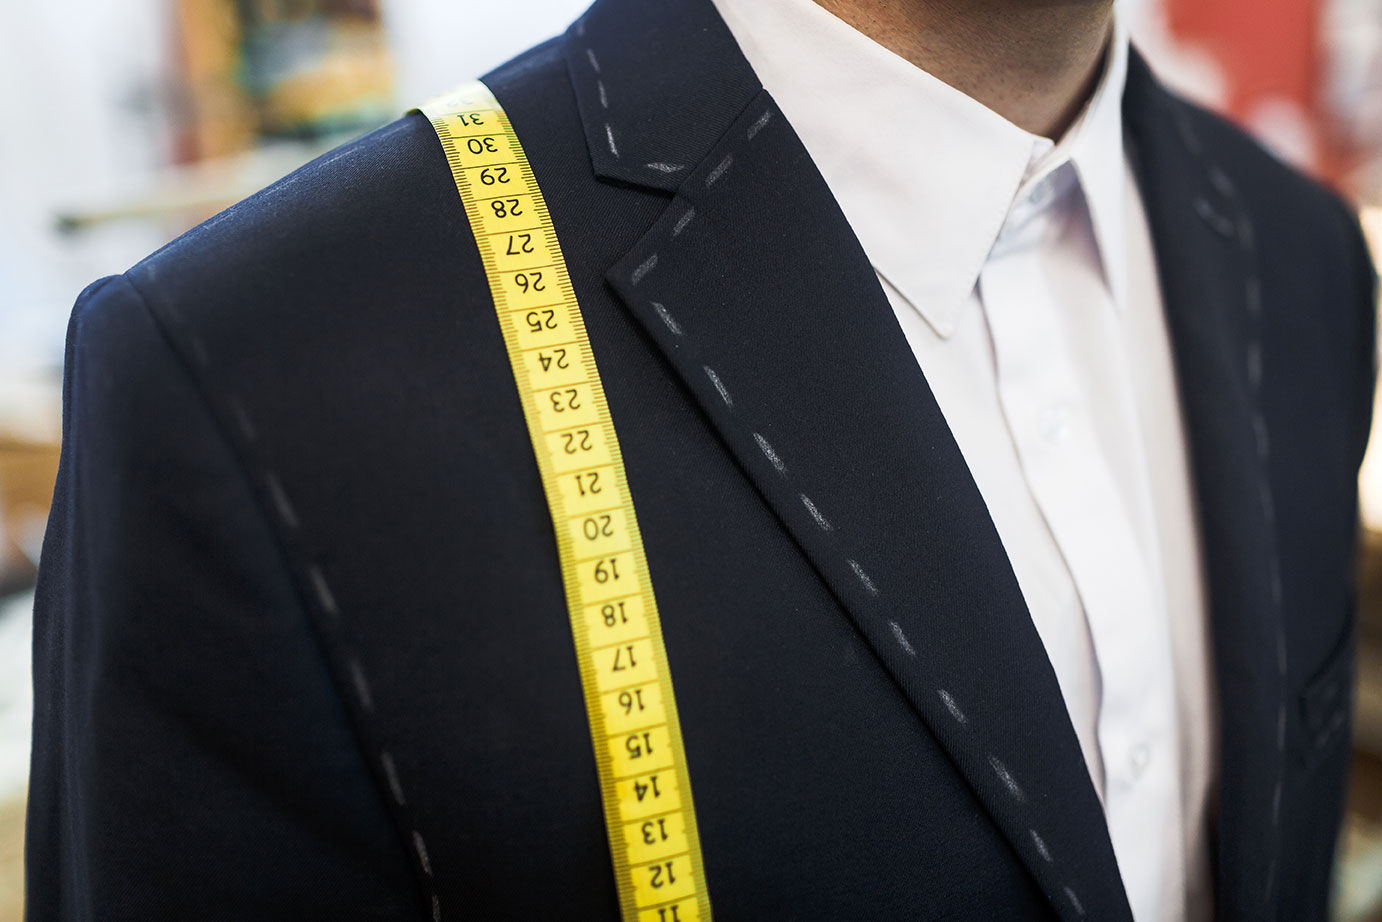 new-jacket-and-measuring-tape-on-businessman_rLWlNuBDRW